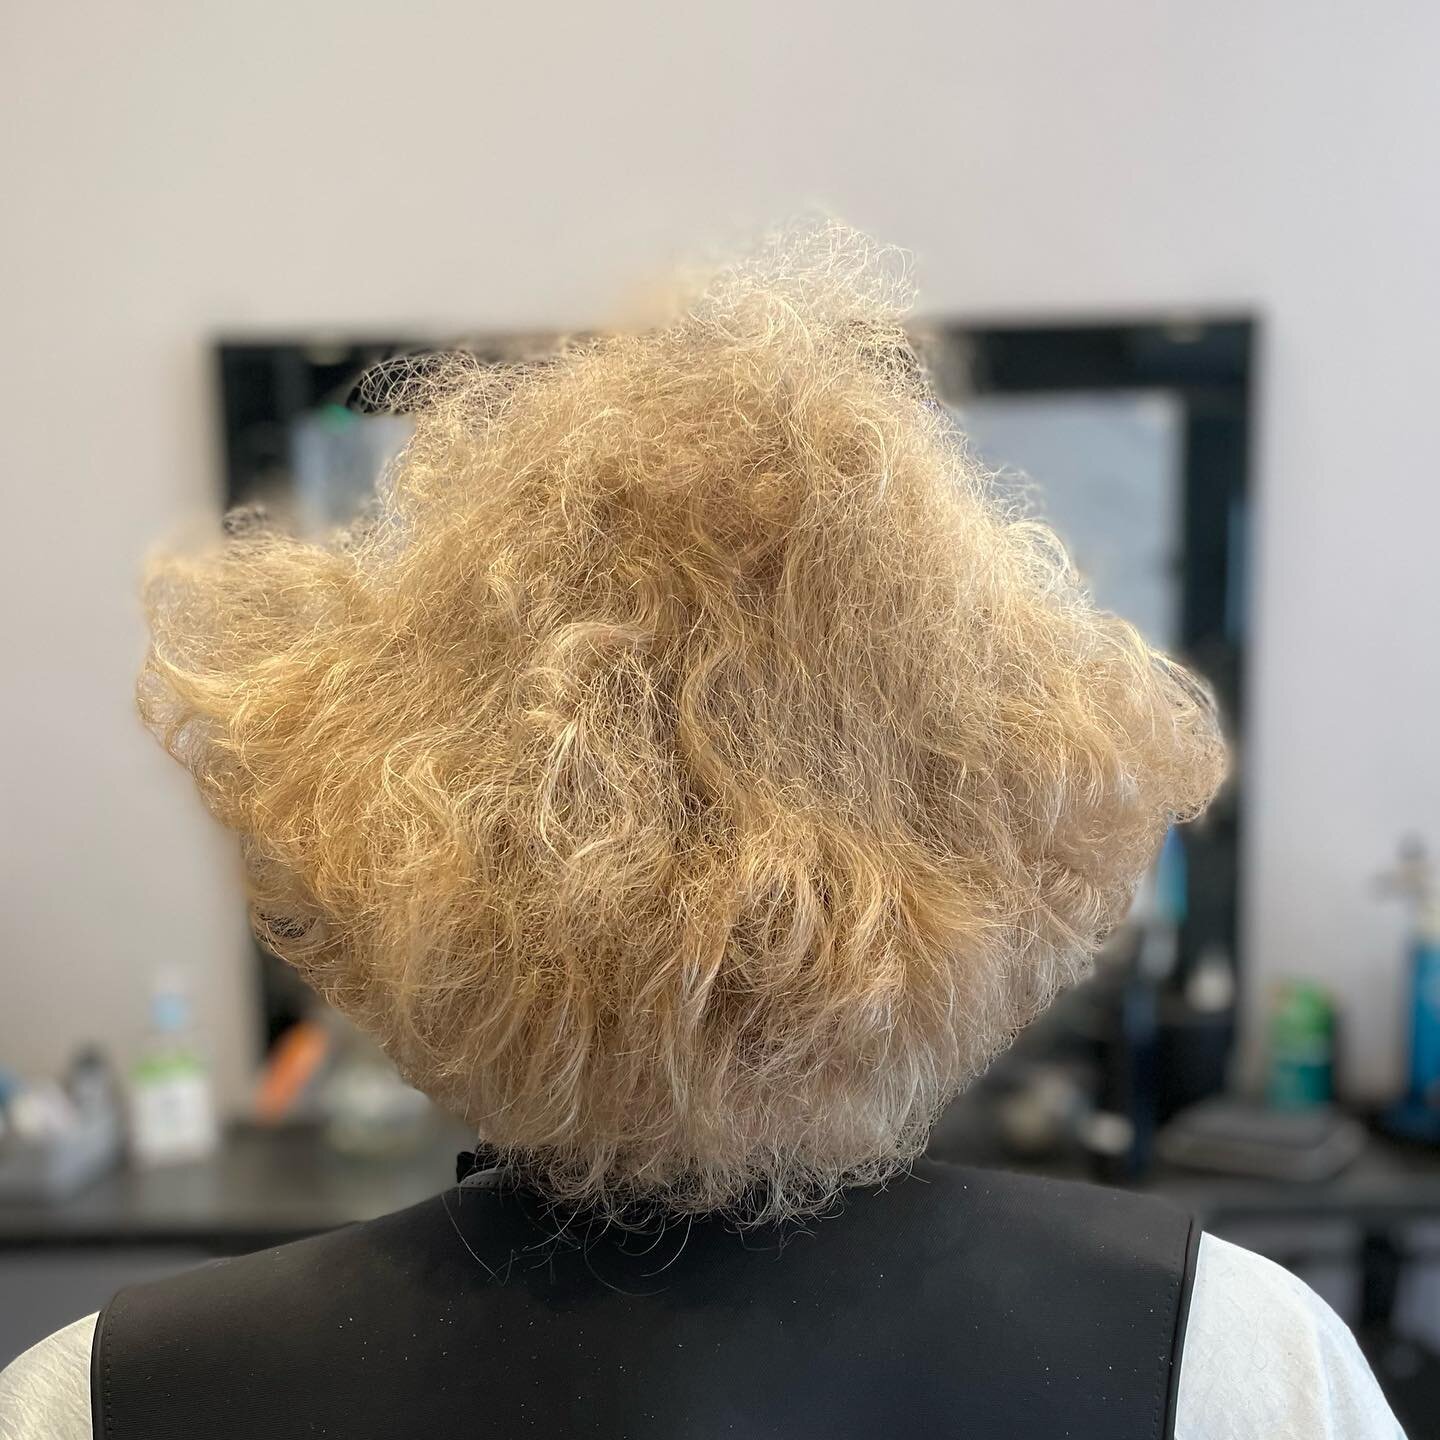 &bull;
&bull;
&bull;
&bull;
&bull;

Needless to say that Ollie needed that haircut. 
Sideshow Bob vibes from behind 

Haircut by Cj

💈
💈
💈
💈

#signaturebarbers #signaturebarberscheltenham #cheltenham #gloucestershire #thesuffolks #suffolkroad #ch